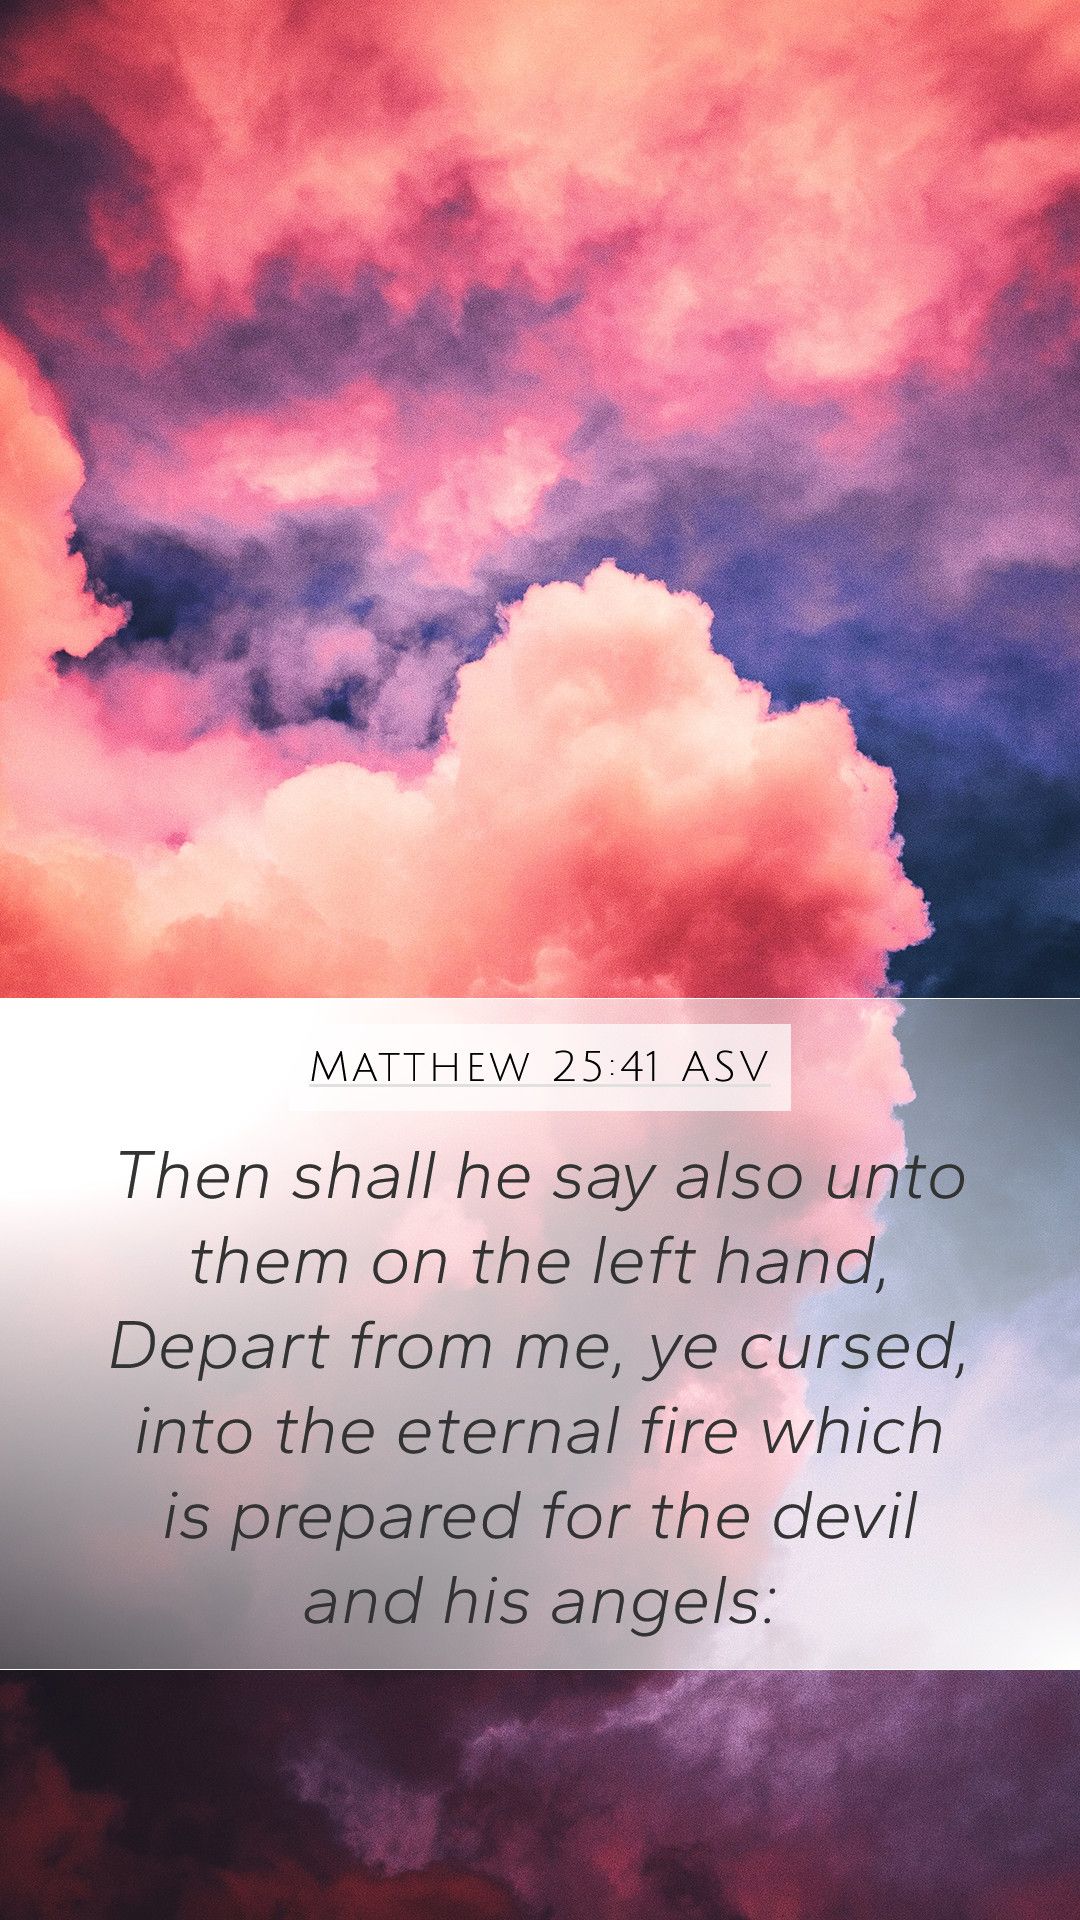 Matthew 25:41 ASV Then shall he say also unto them on the left hand, Depart from me, ye cursed, into the eternal fire which is prepared for the devil and his angels. - Cloud